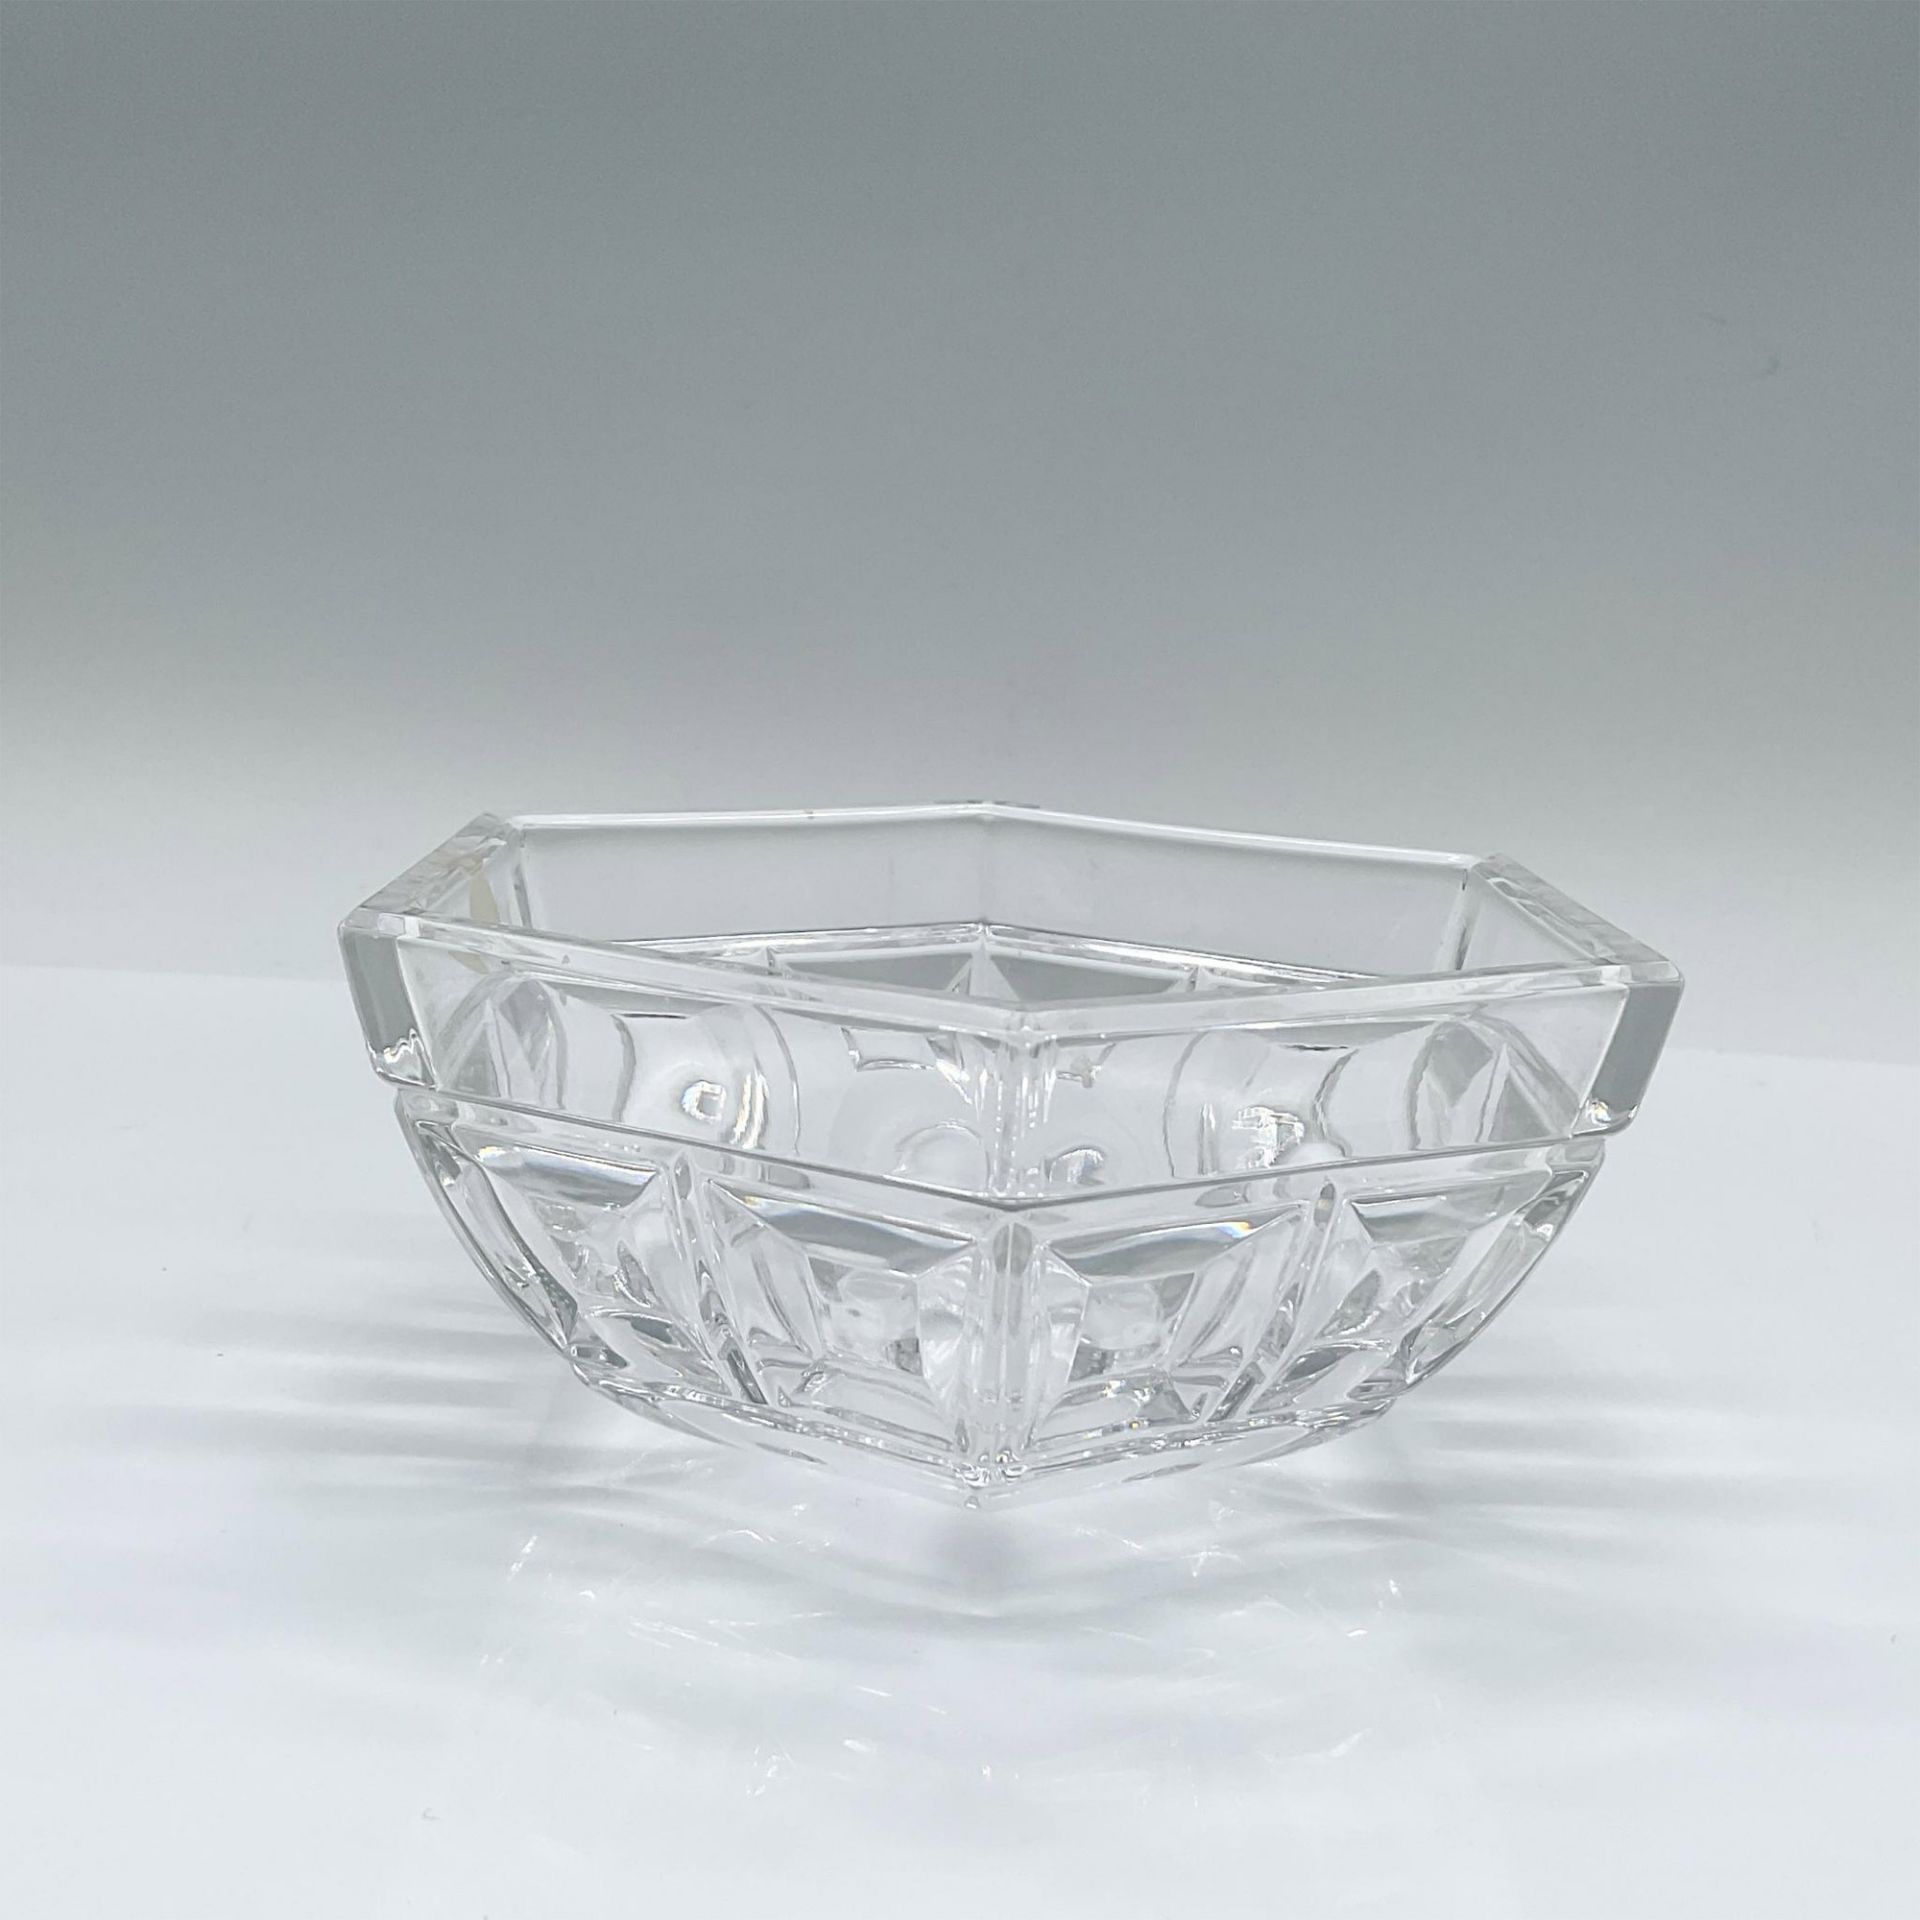 Rosenthal Lead Crystal Candy Bowl, Domus - Image 2 of 3